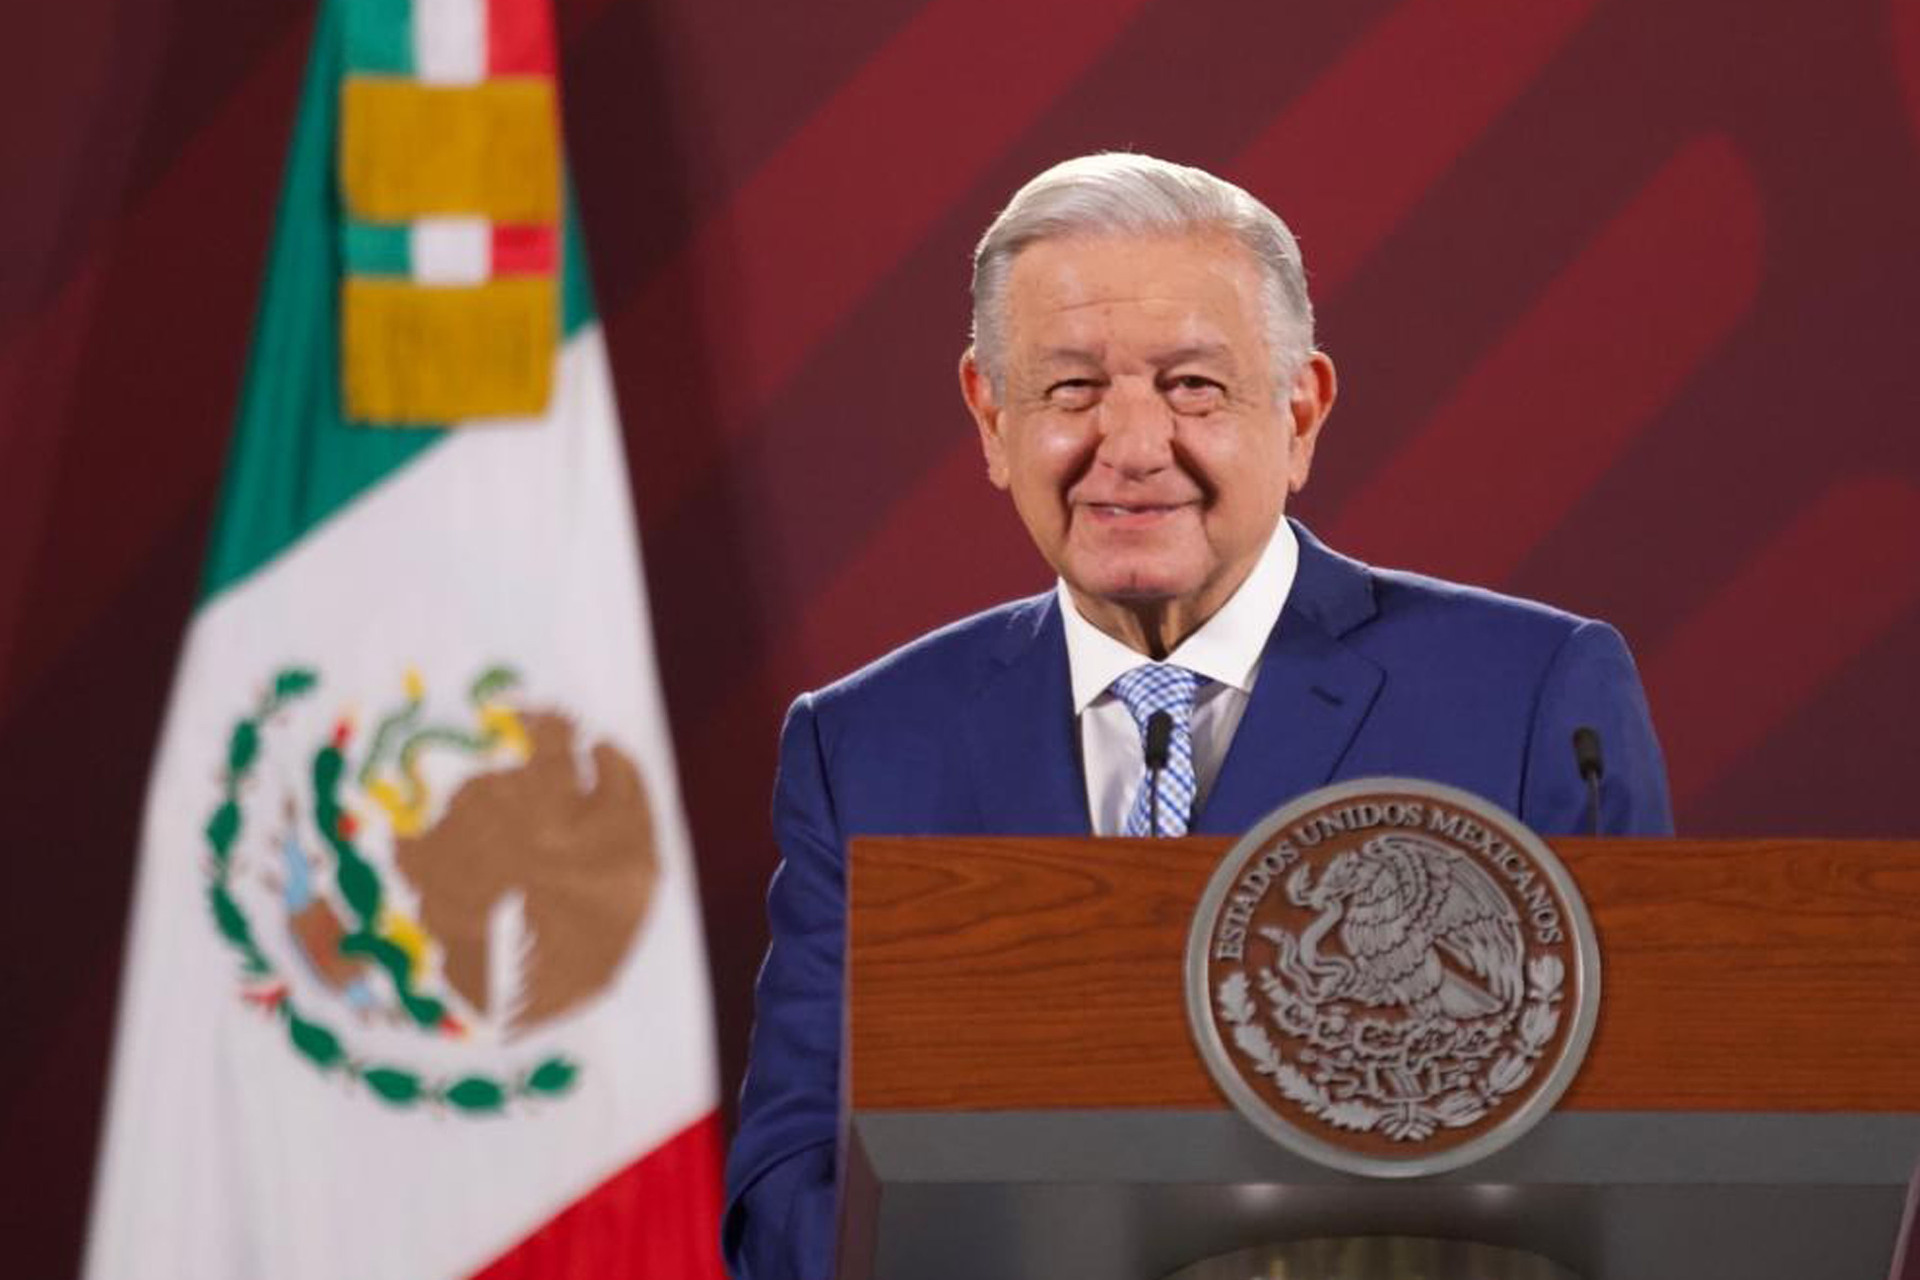 Commission of the Congress of Peru will debate a motion to reject AMLO